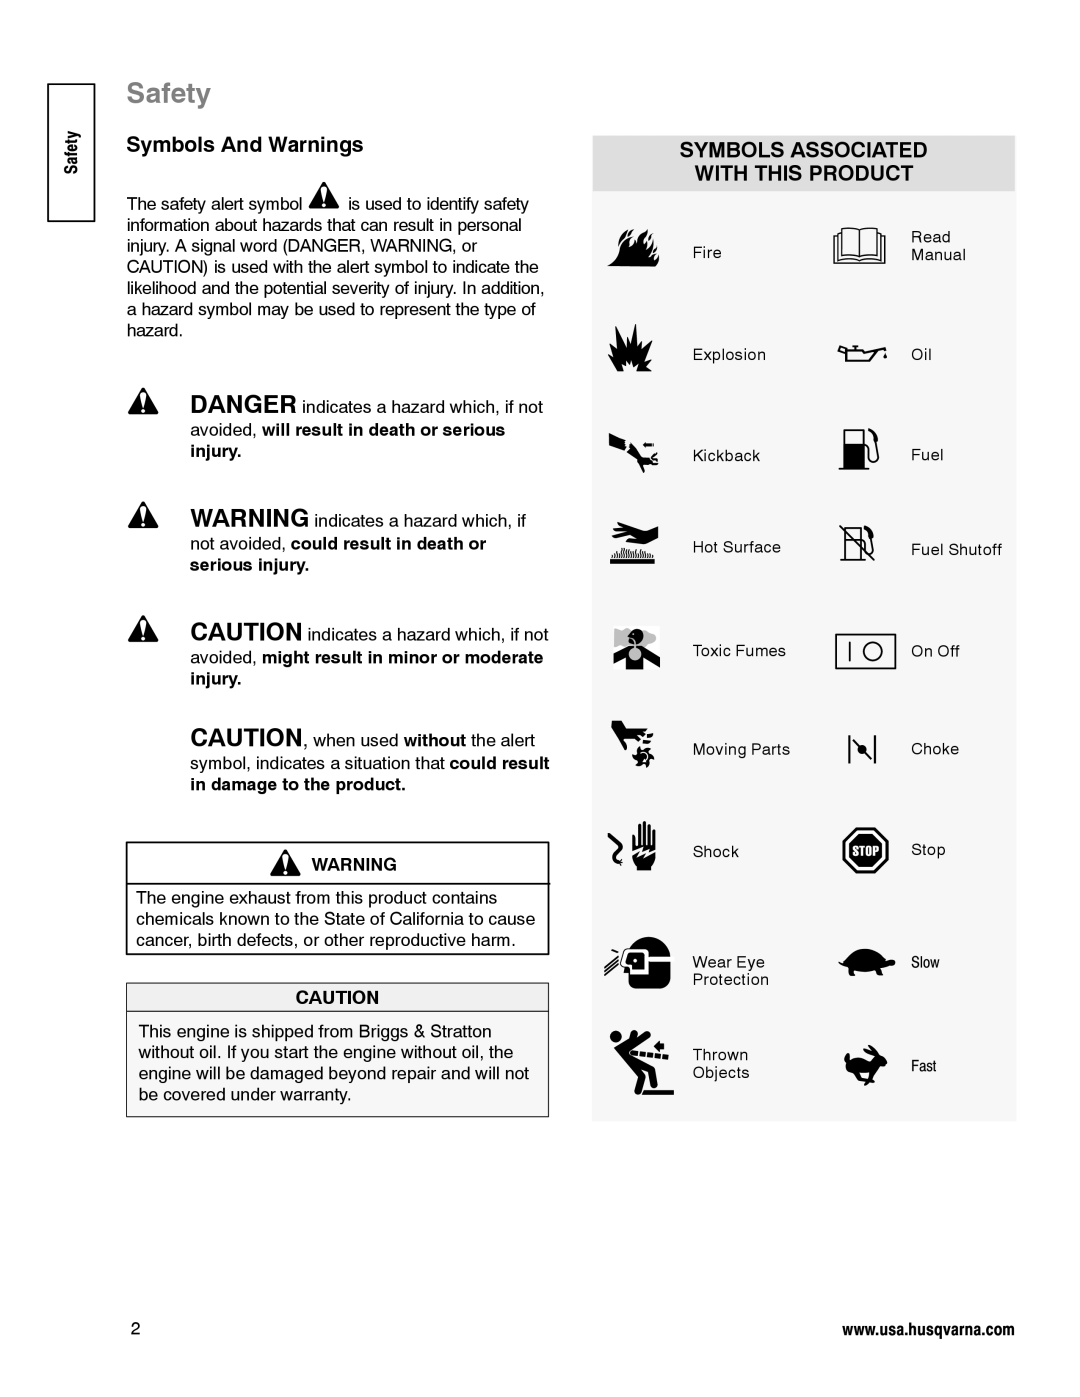 Husqvarna LE389 manual Safety, Symbols And Warnings, Symbols Associated With This Product 